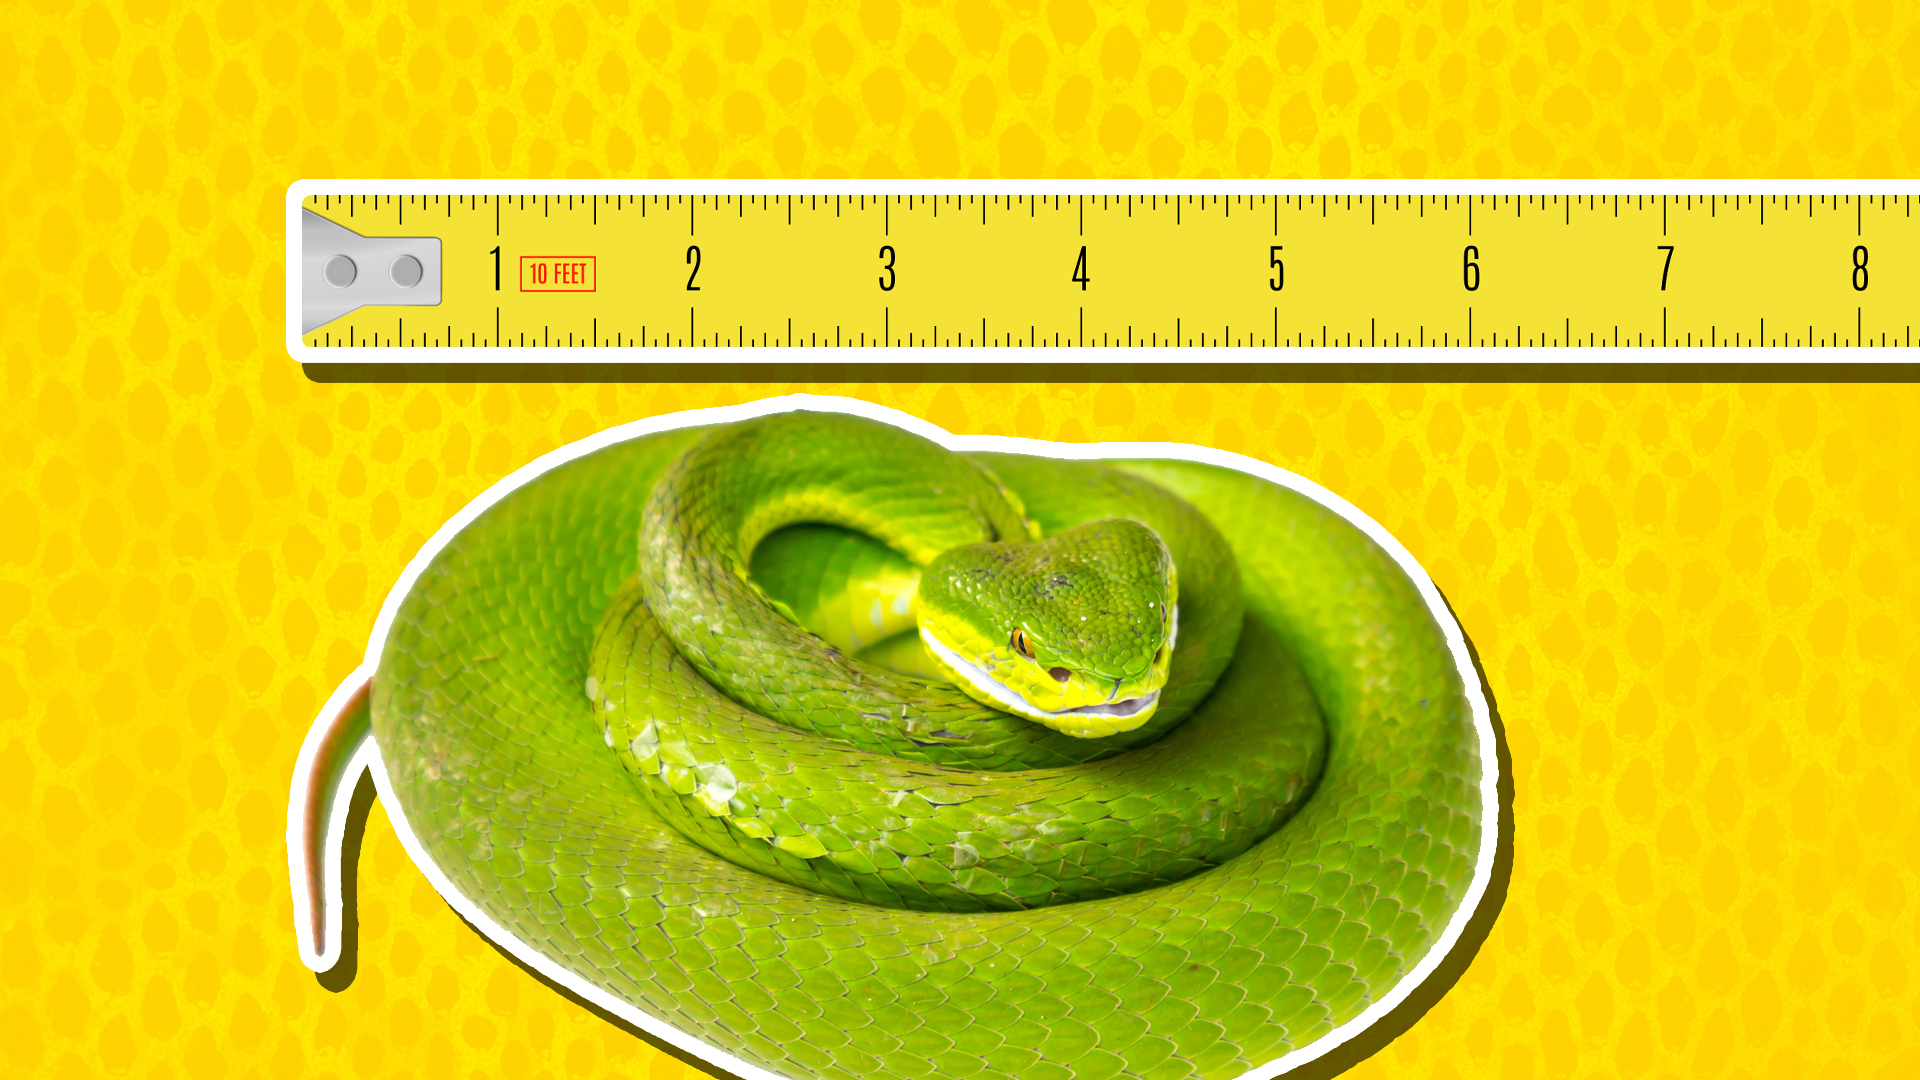 A tape measure next to a coiled viper